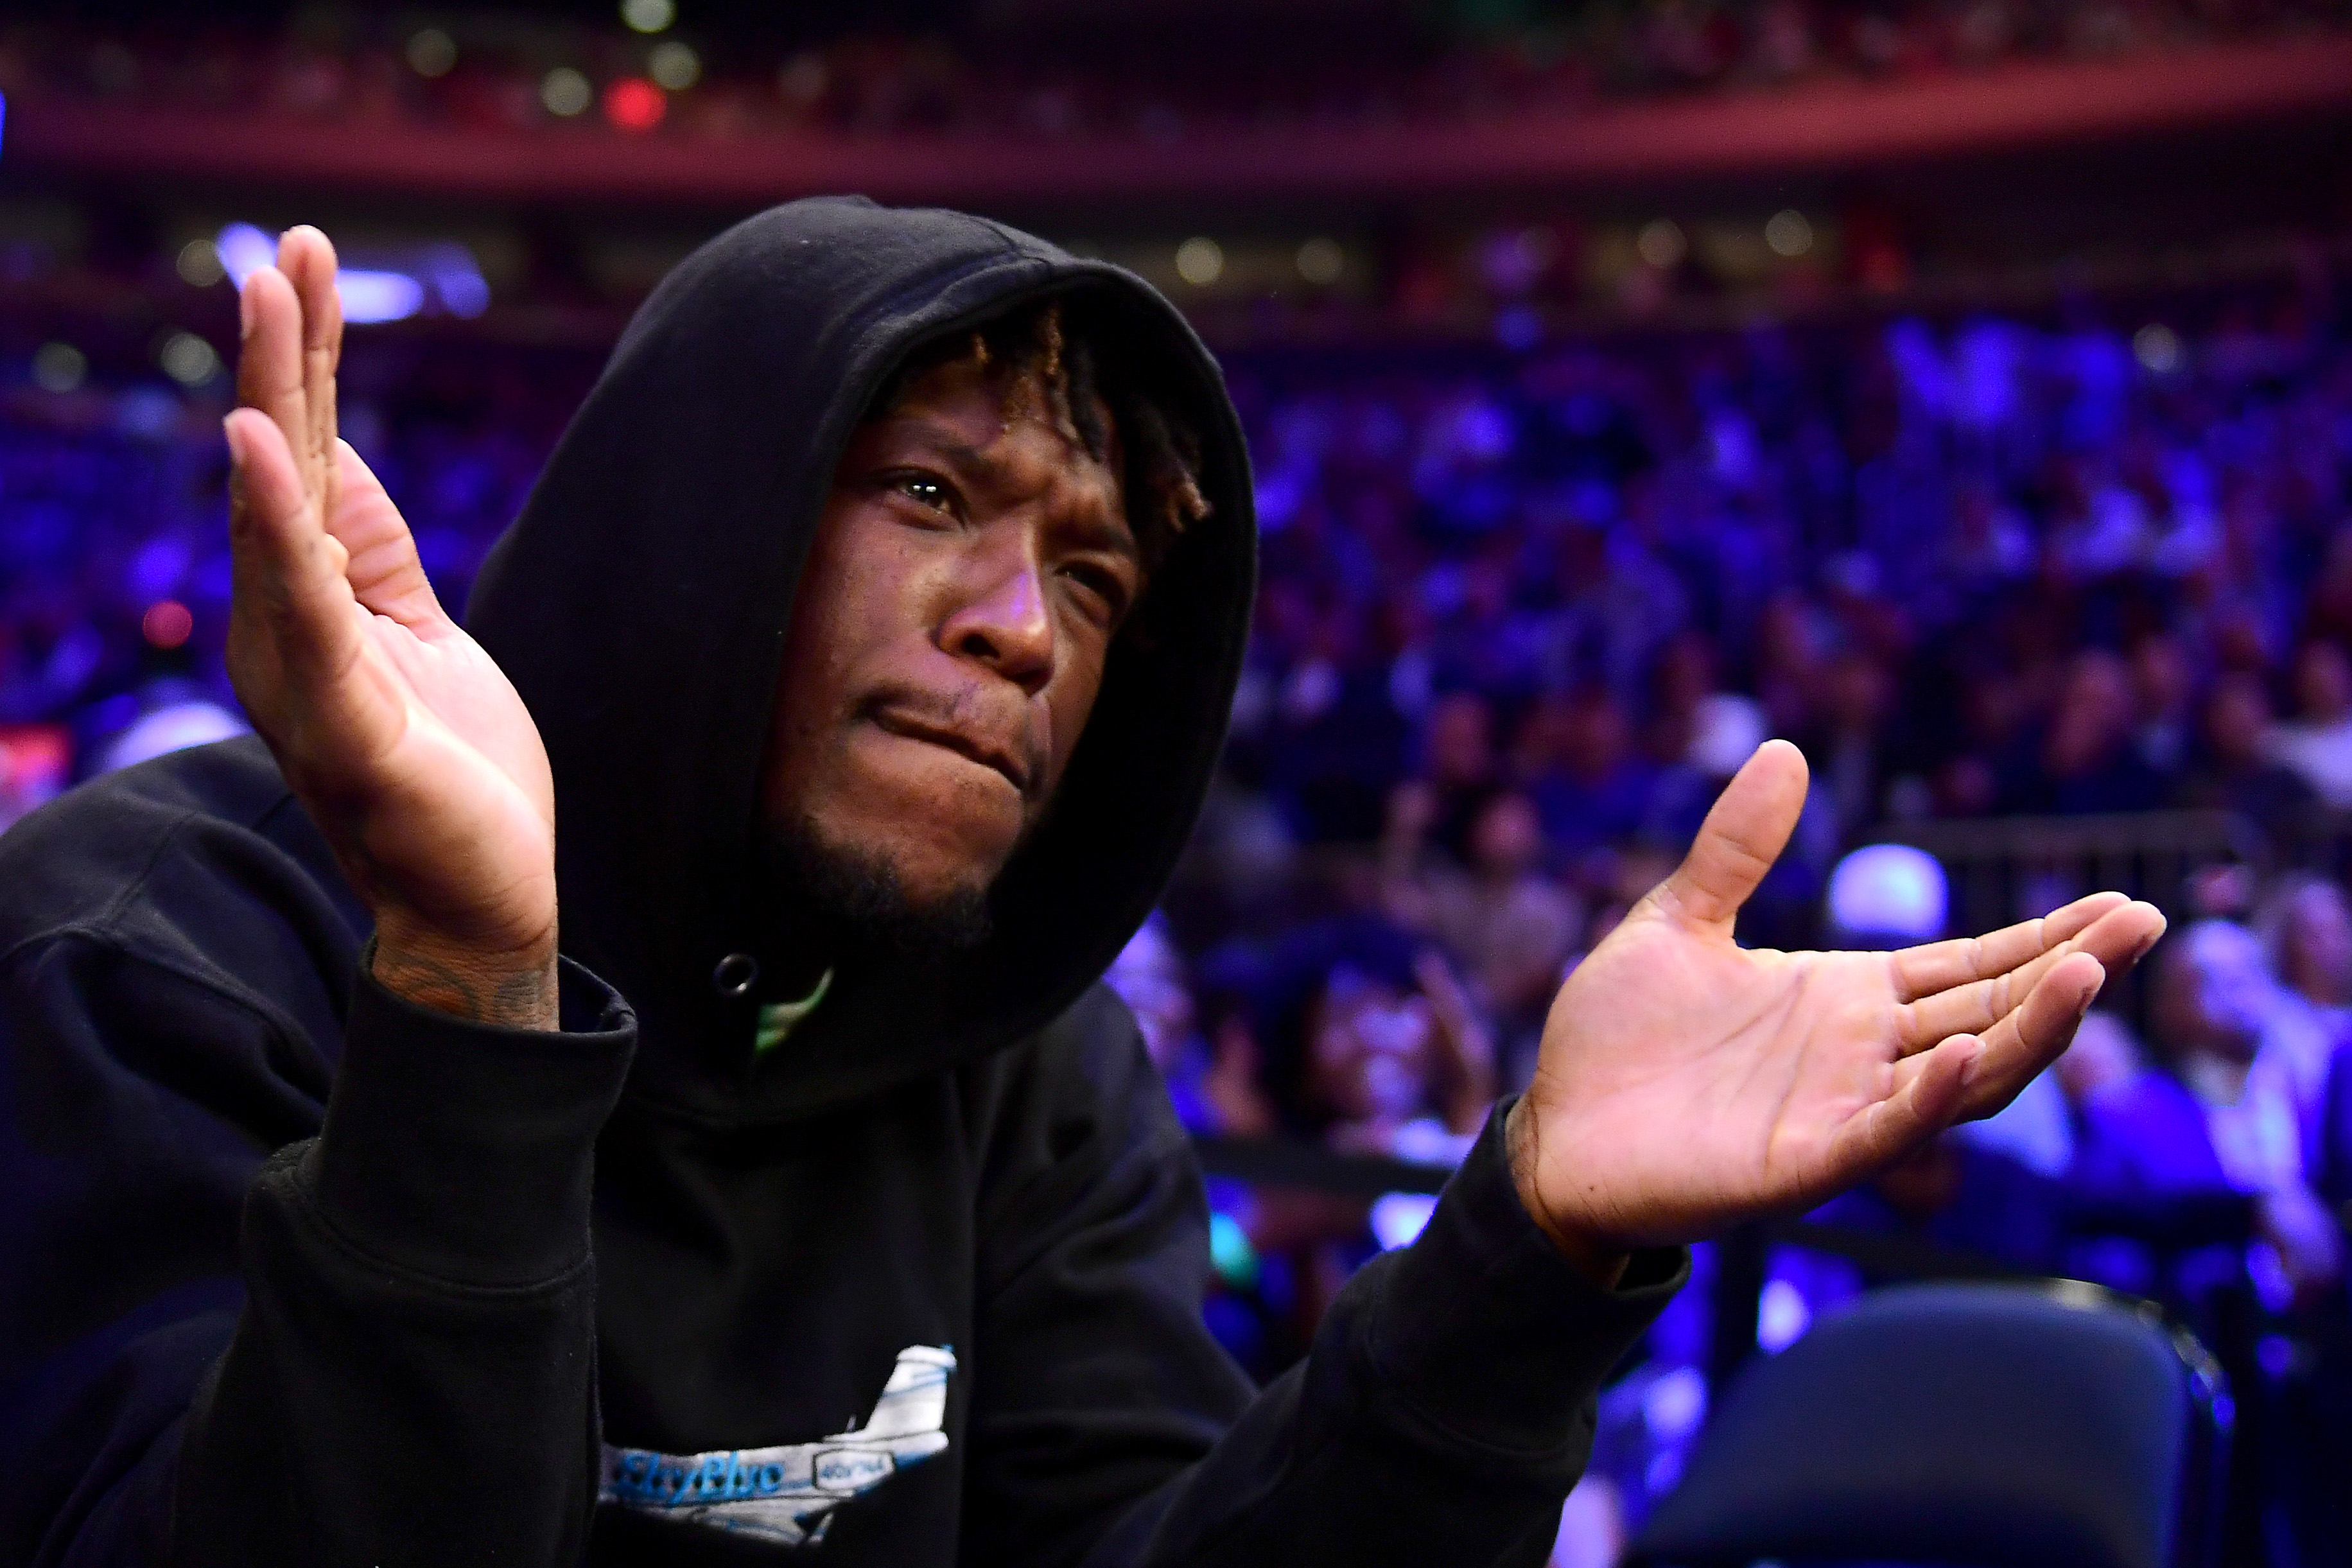 NBA slam dunk champ Nate Robinson reportedly to play in Israel